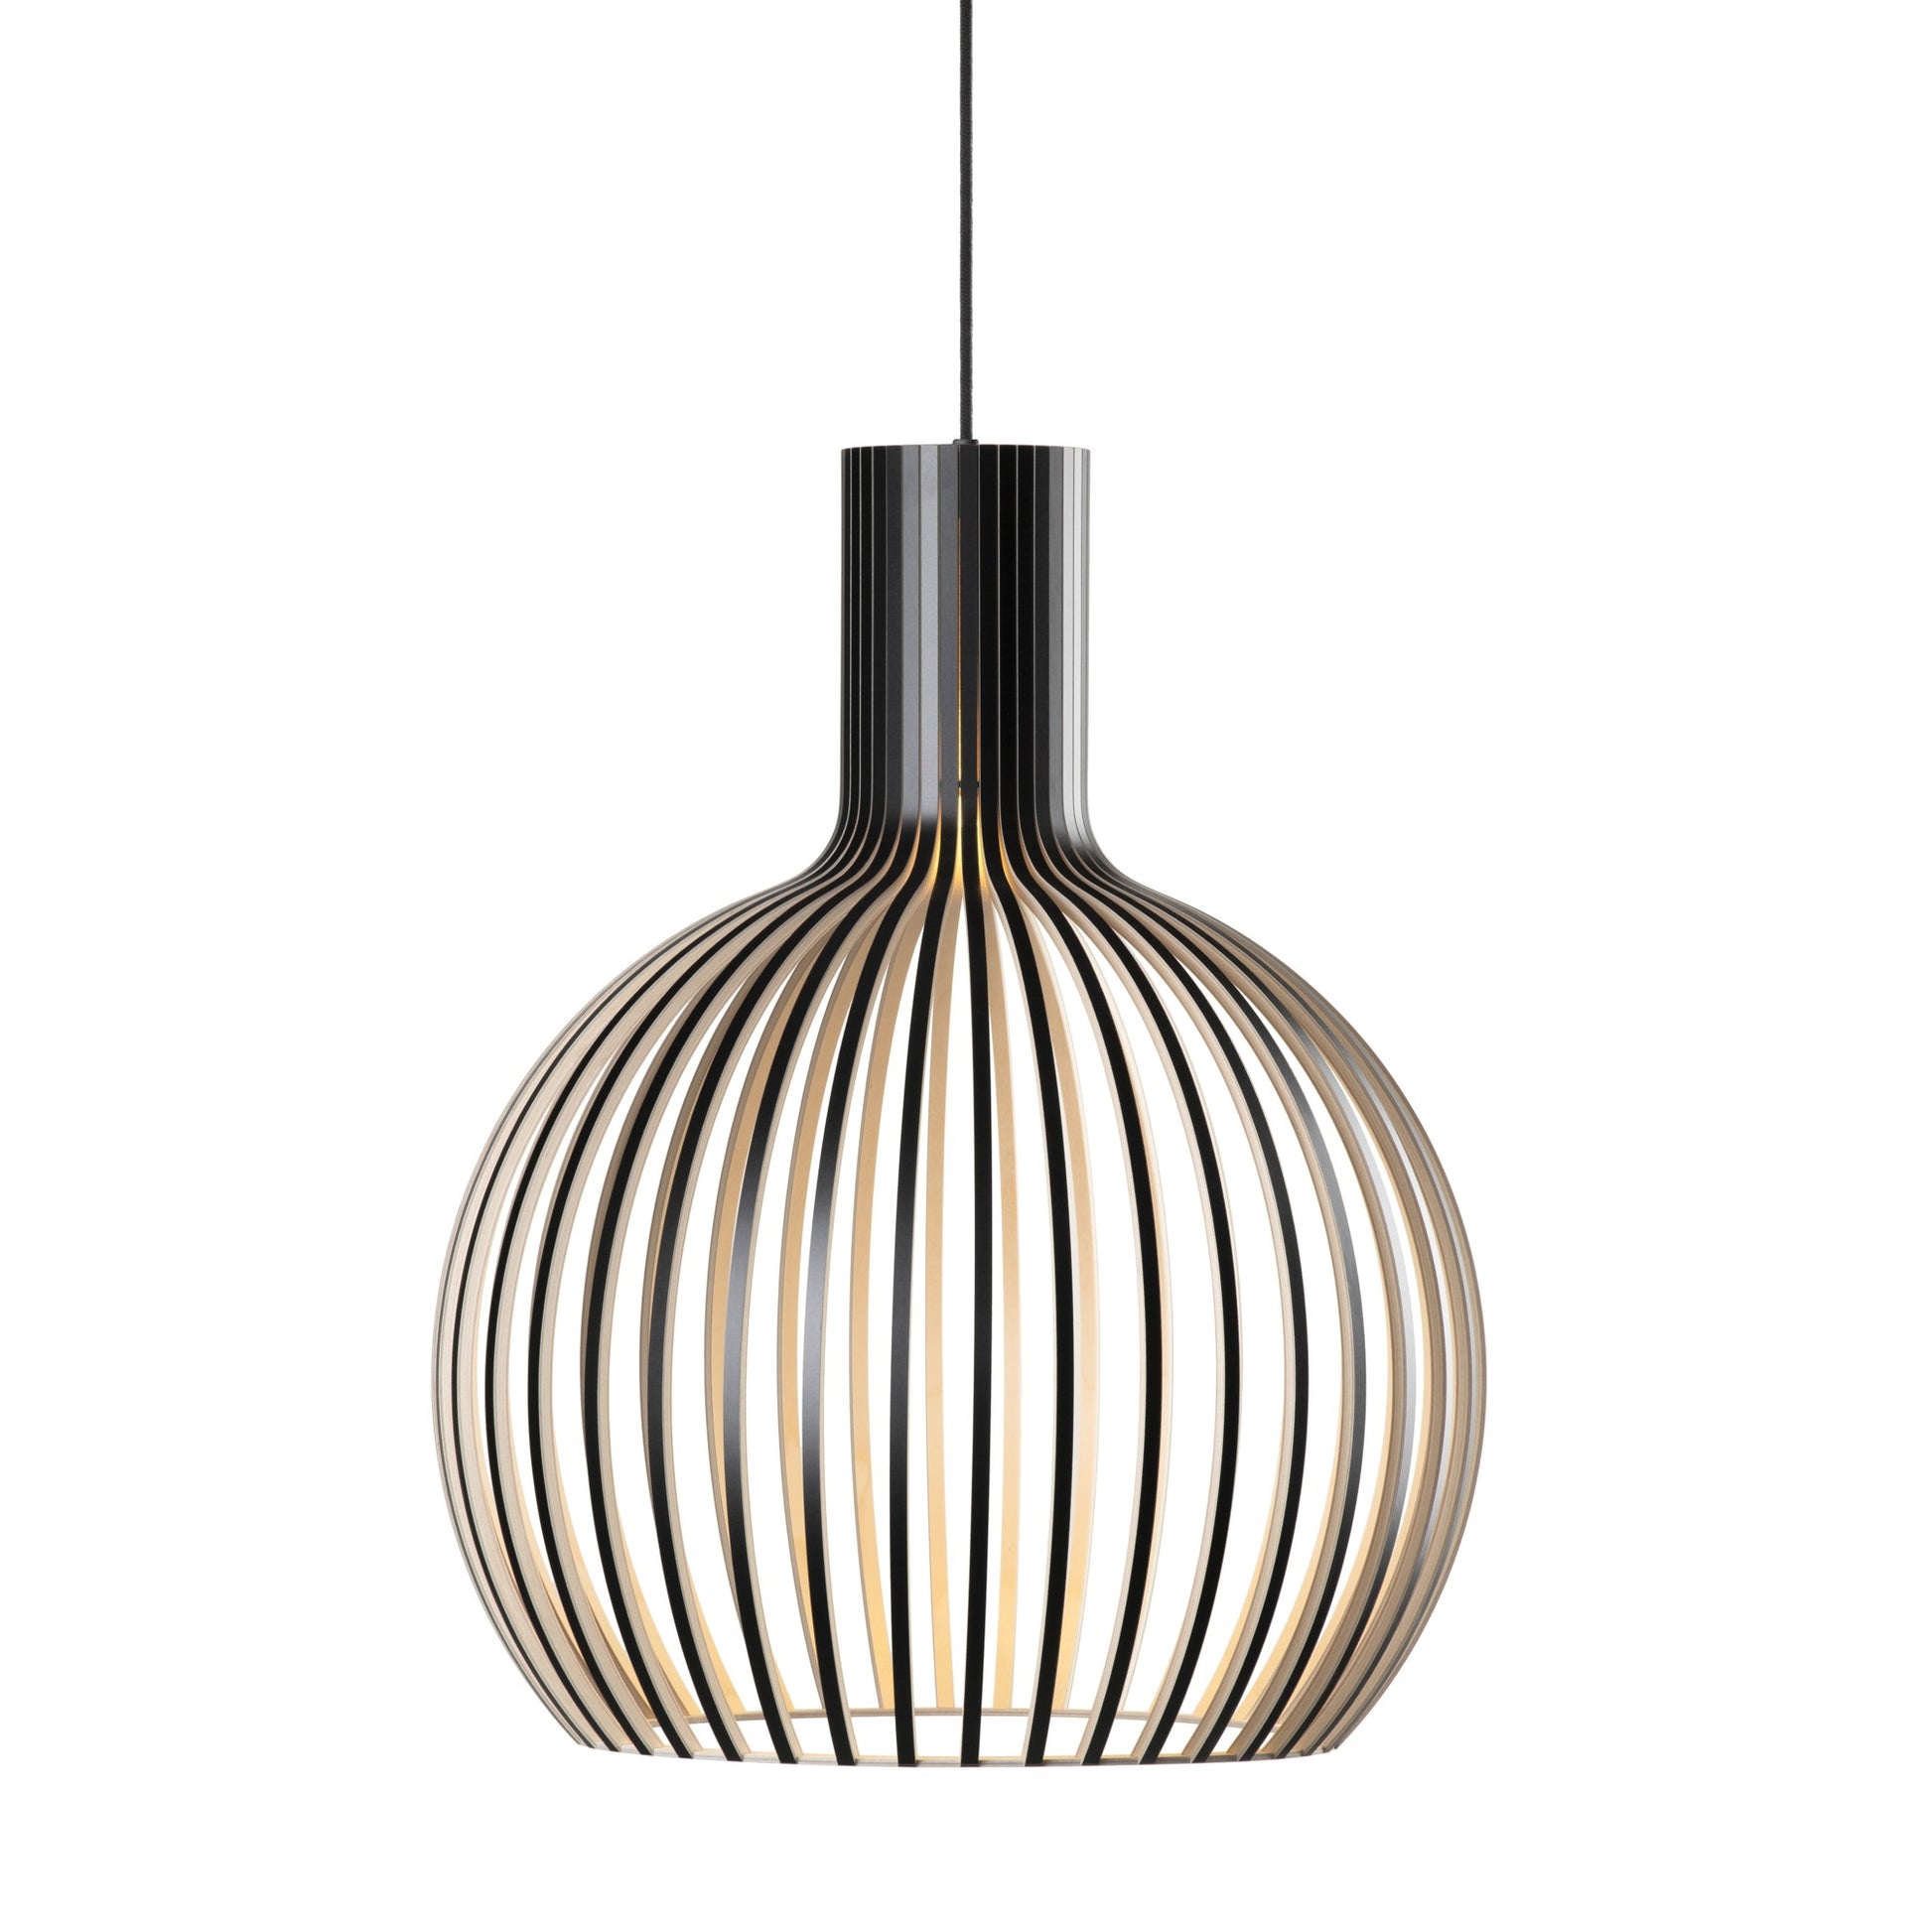 Octo 4241 Pendant Lamp by Secto #Black